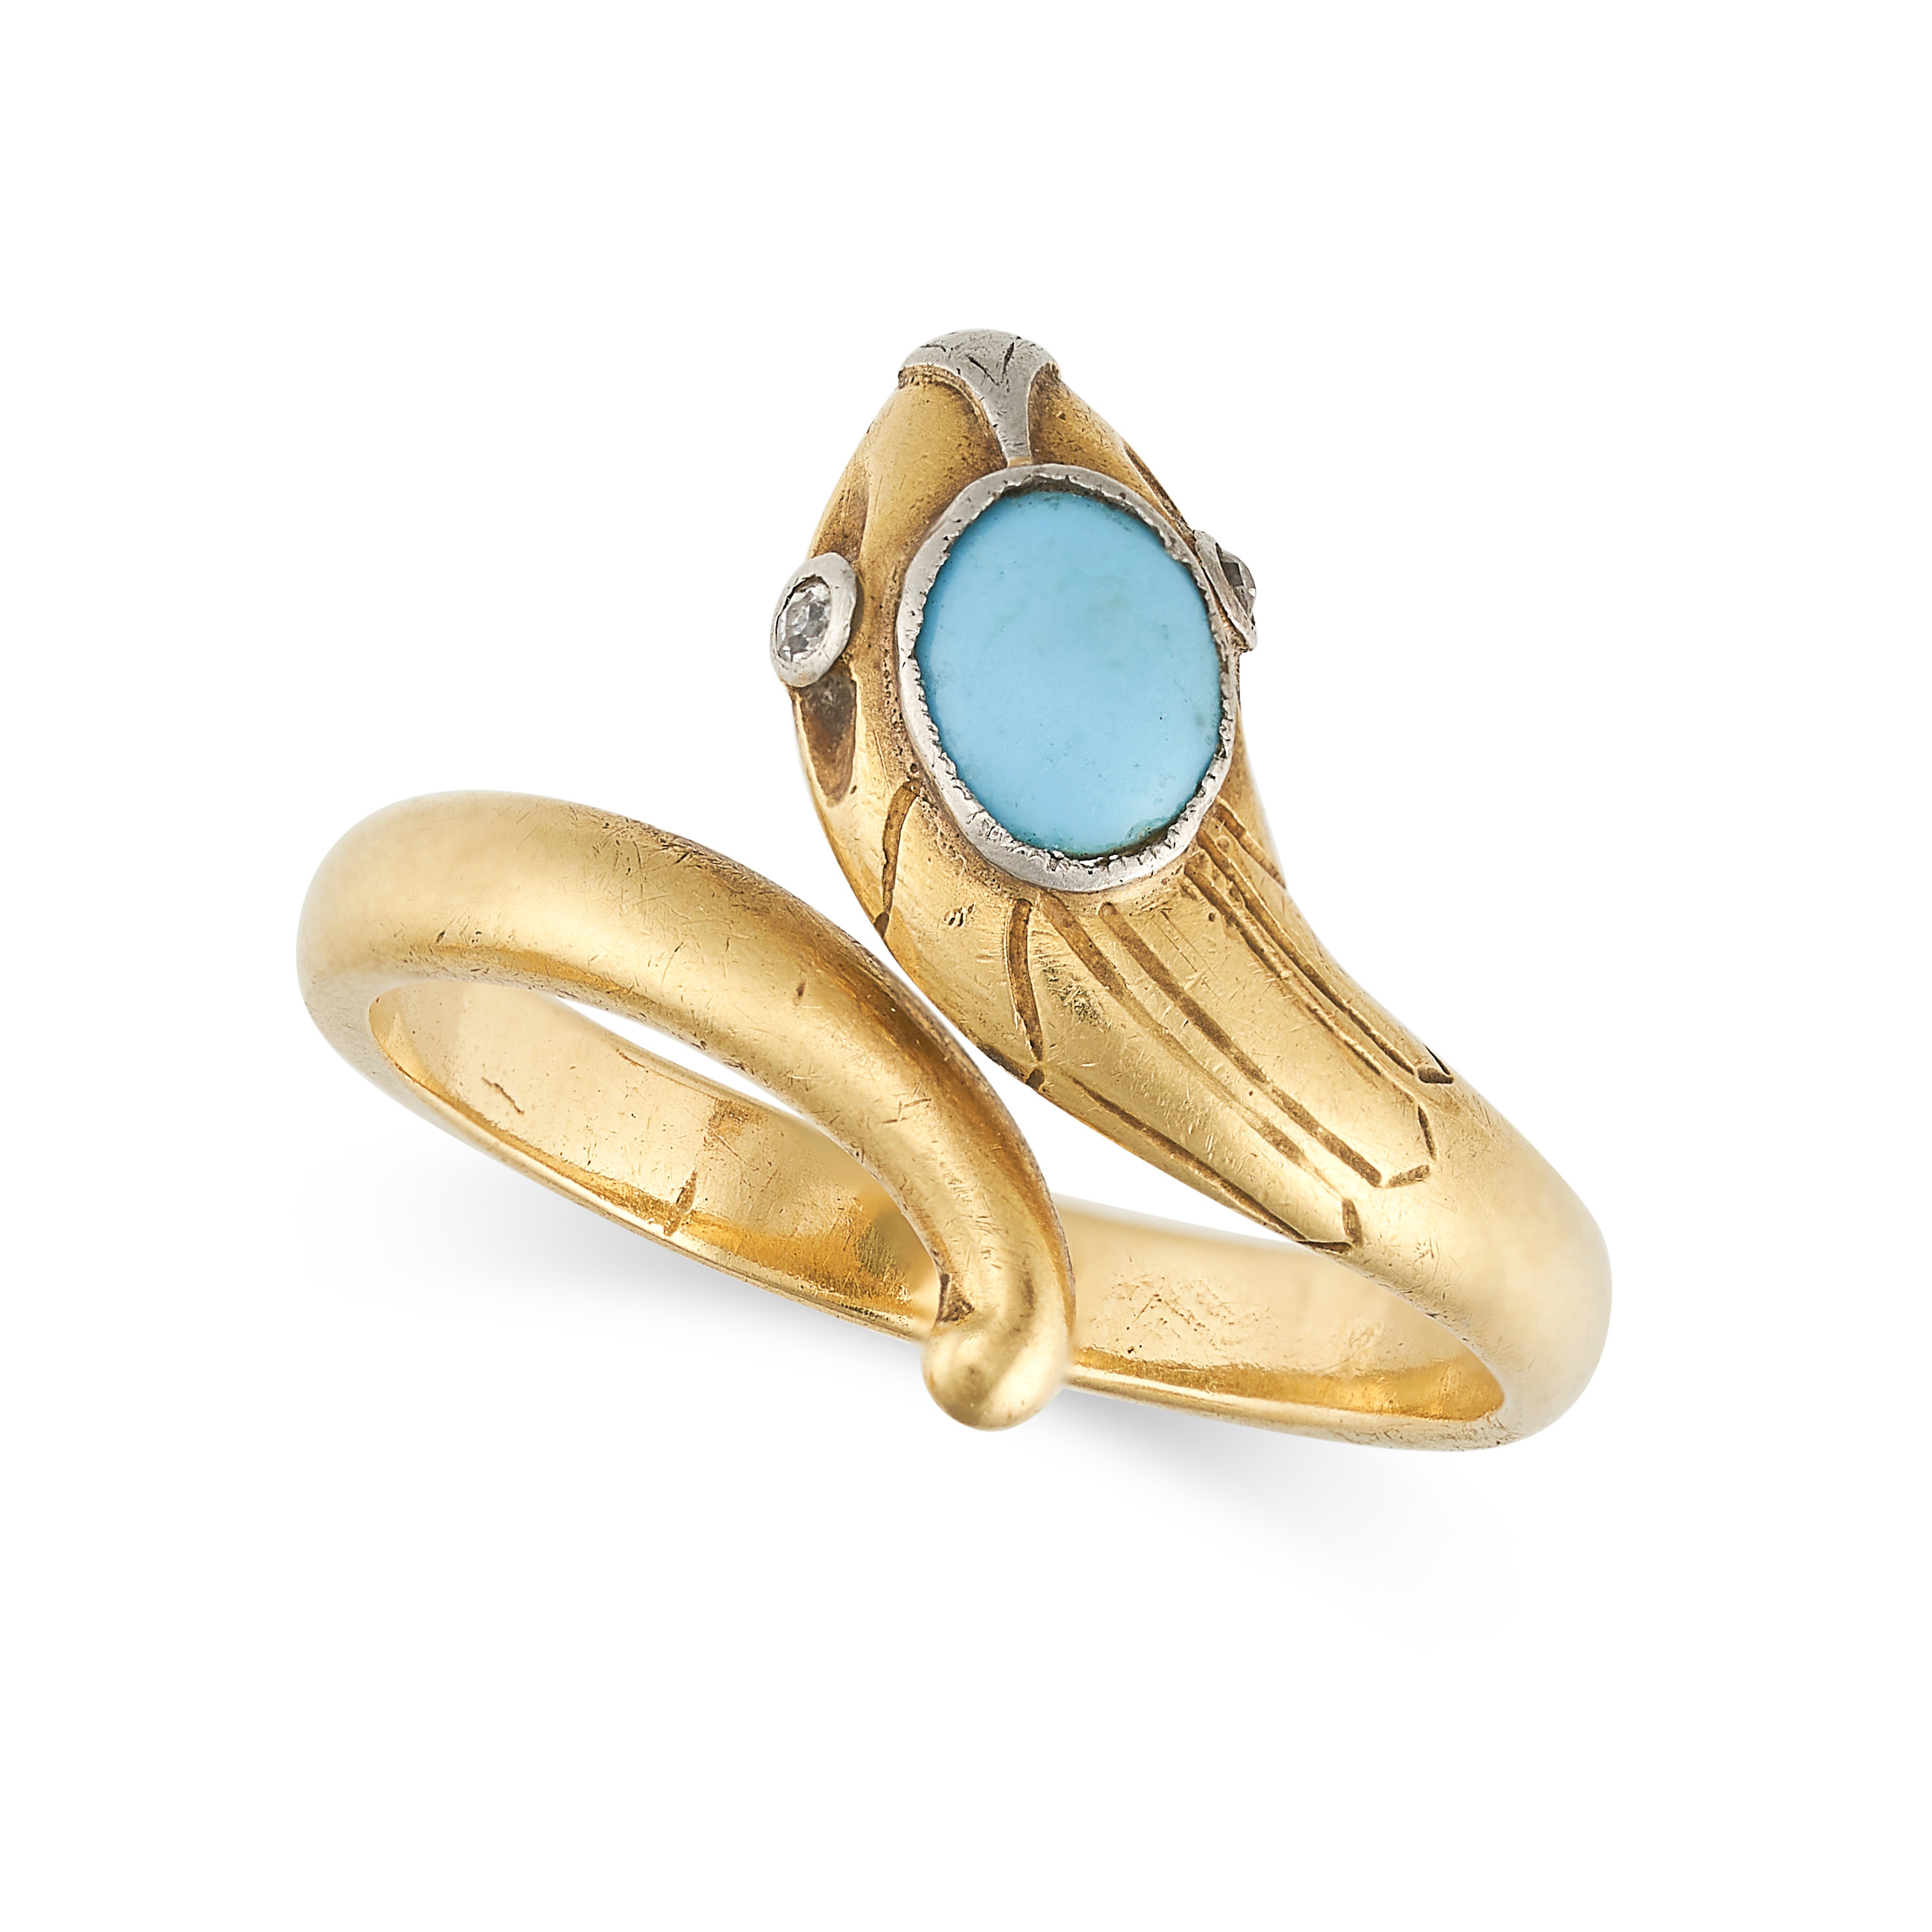 AN ANTIQUE TURQUOISE AND DIAMOND SNAKE RING in yellow gold, designed as a coiled snake, set with ...